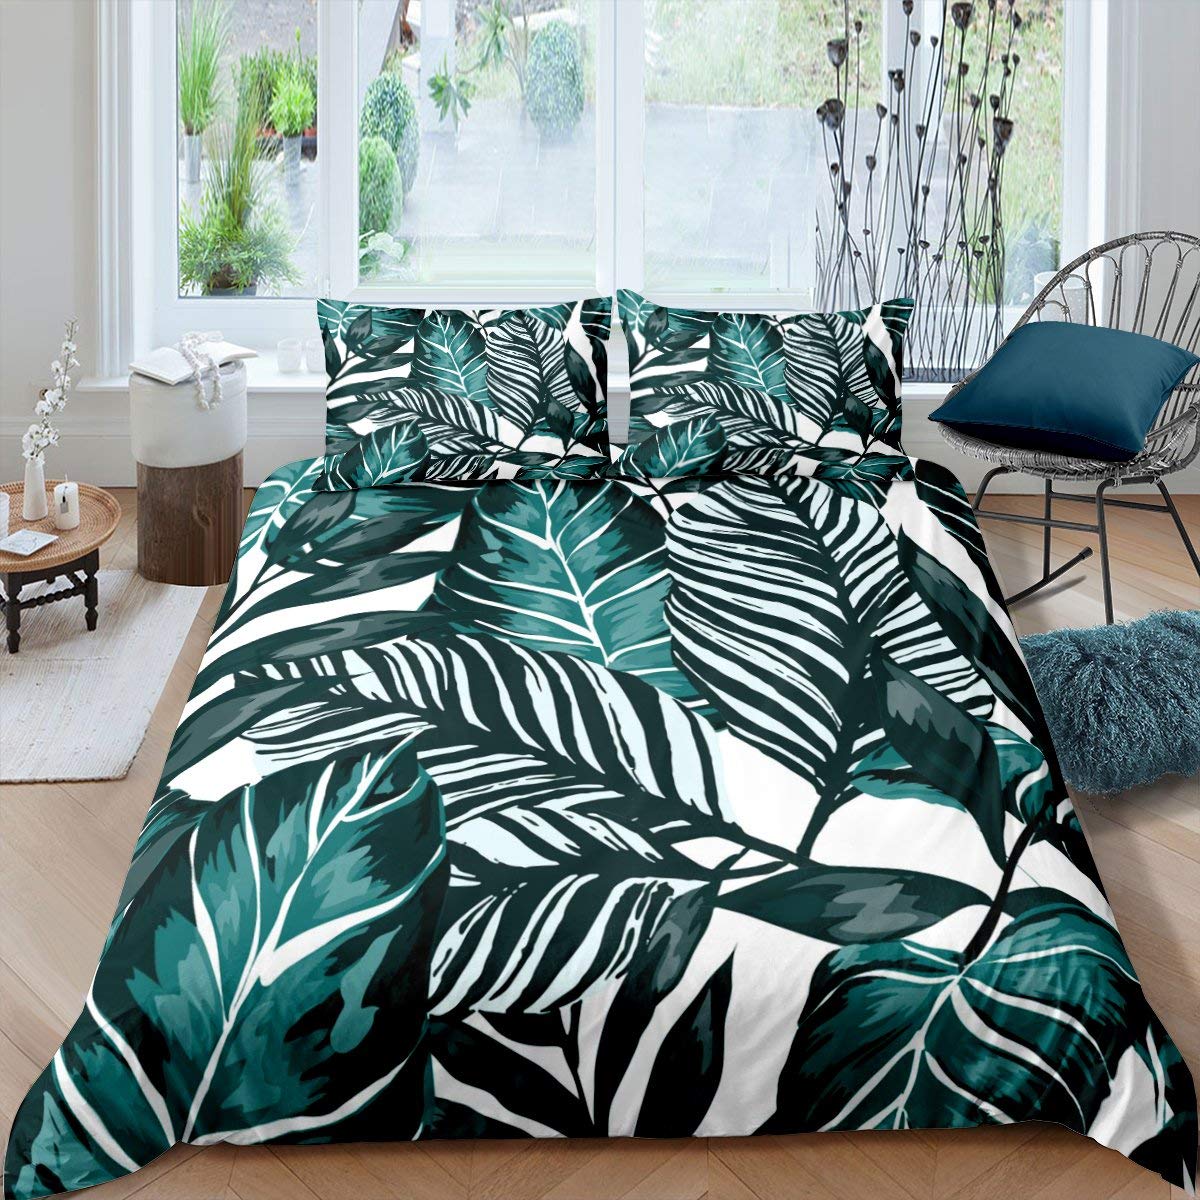 Tropical duvet cover painting